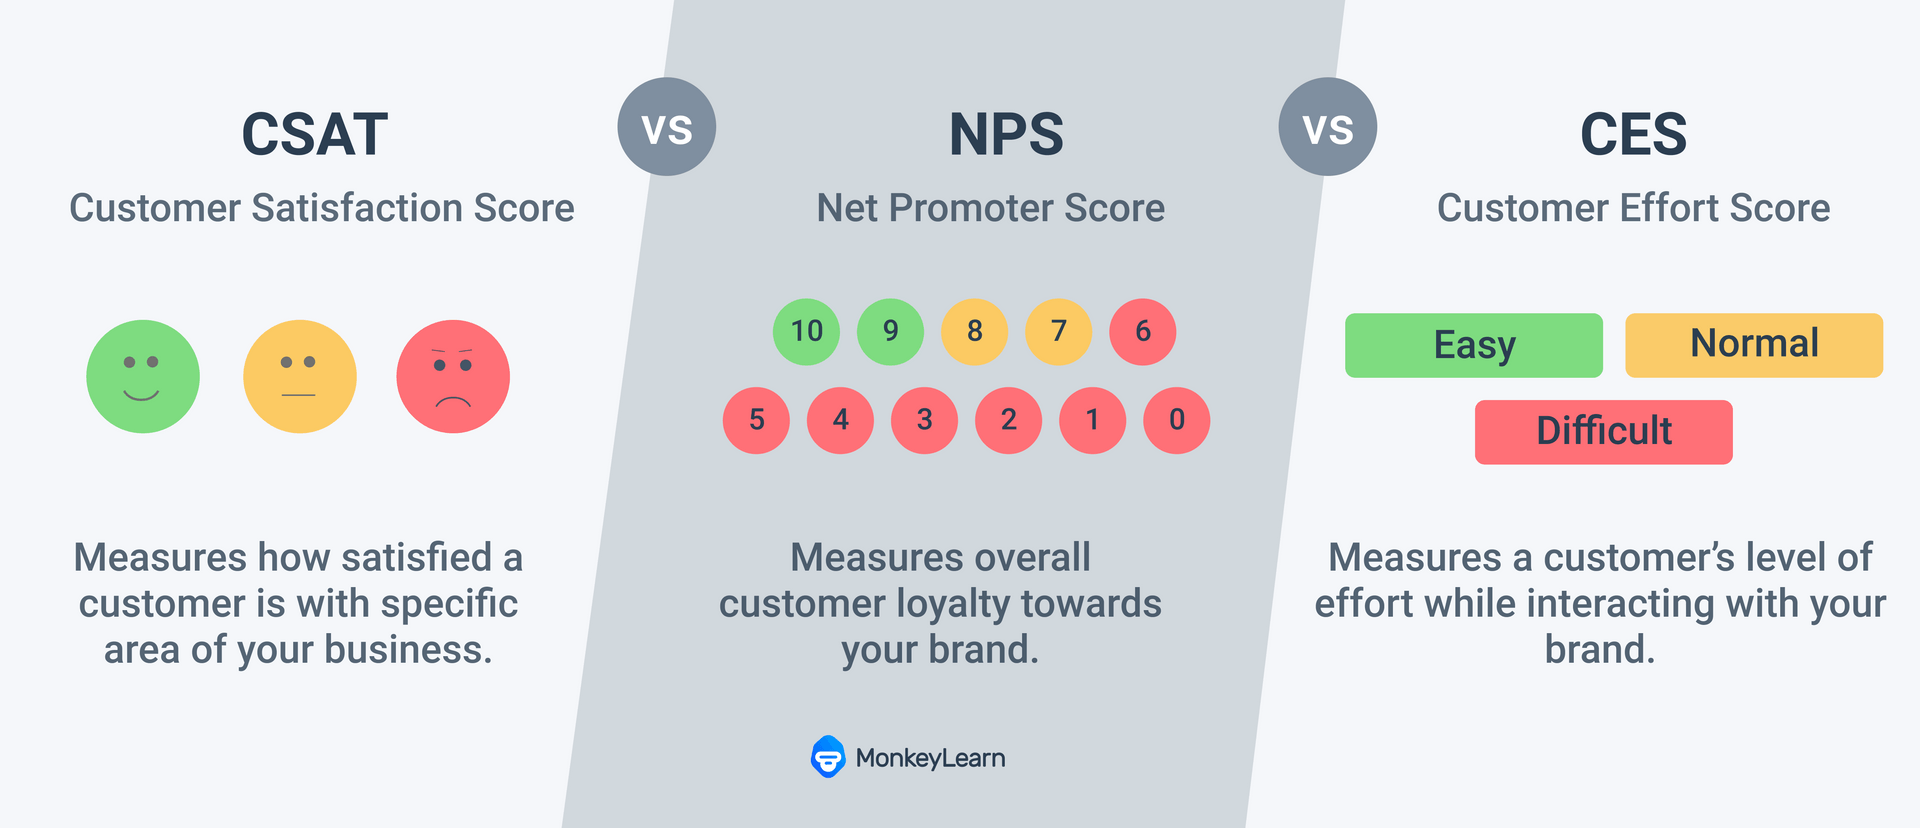 CSAT measures customer satisfaction in specific area. NPS measures overall loyalty to a brand. CES measures customer effort.